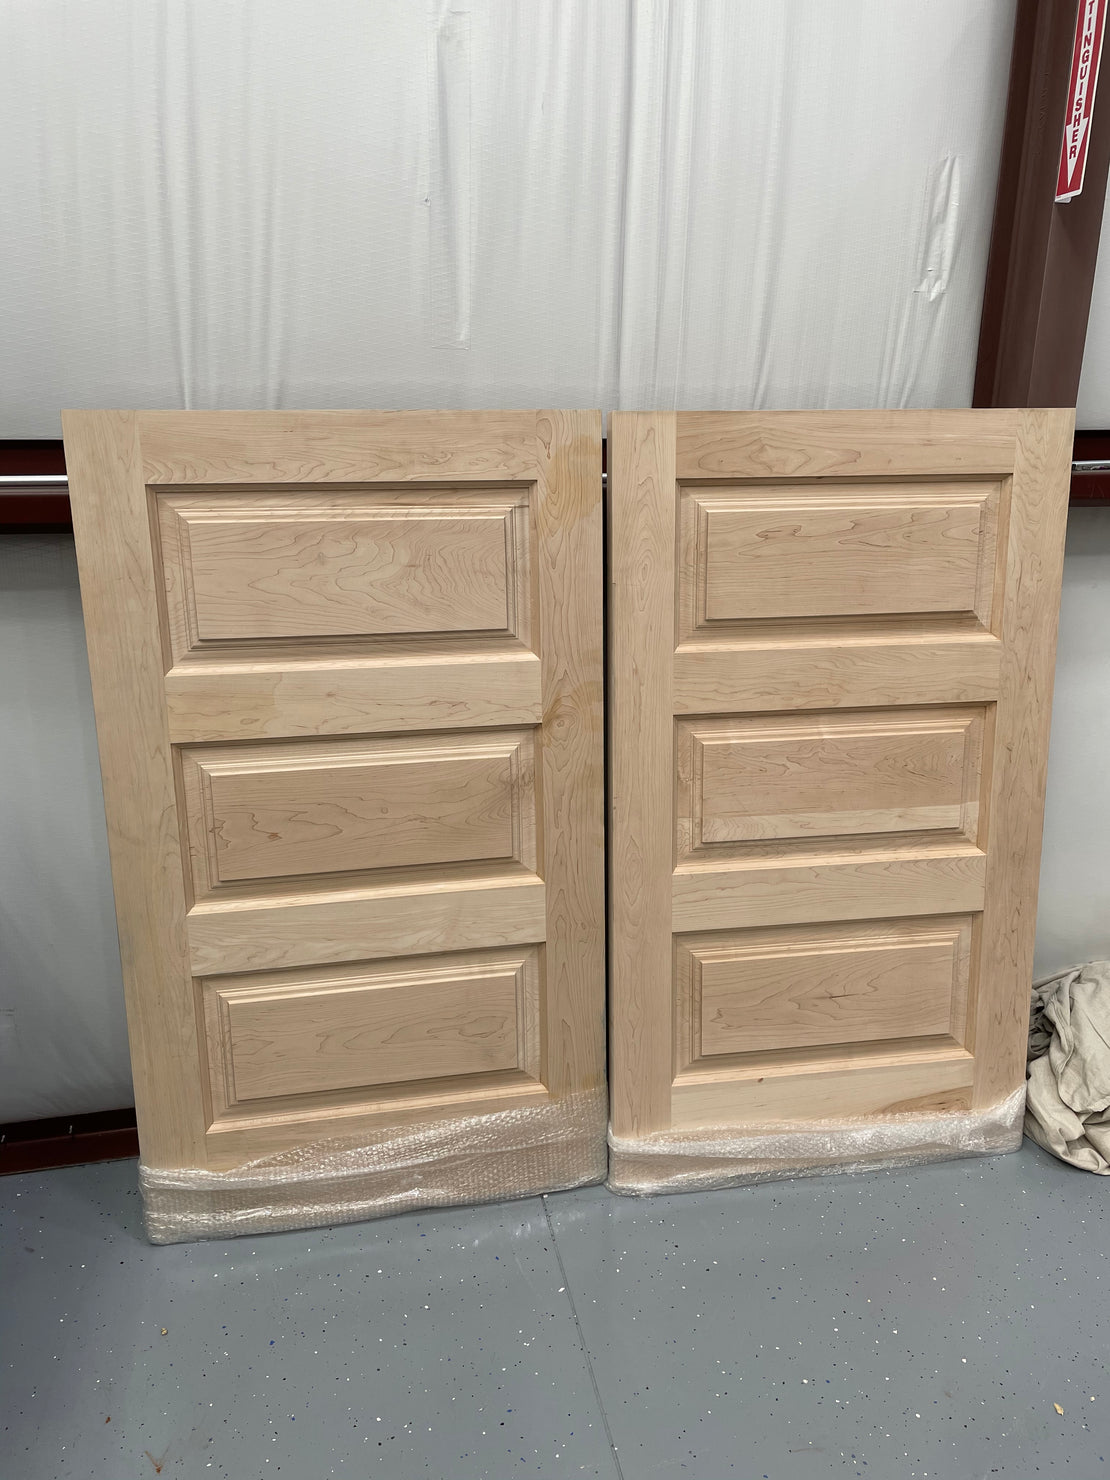 Warehouse Sale A24 - Solid Wood Fitting Room Doors